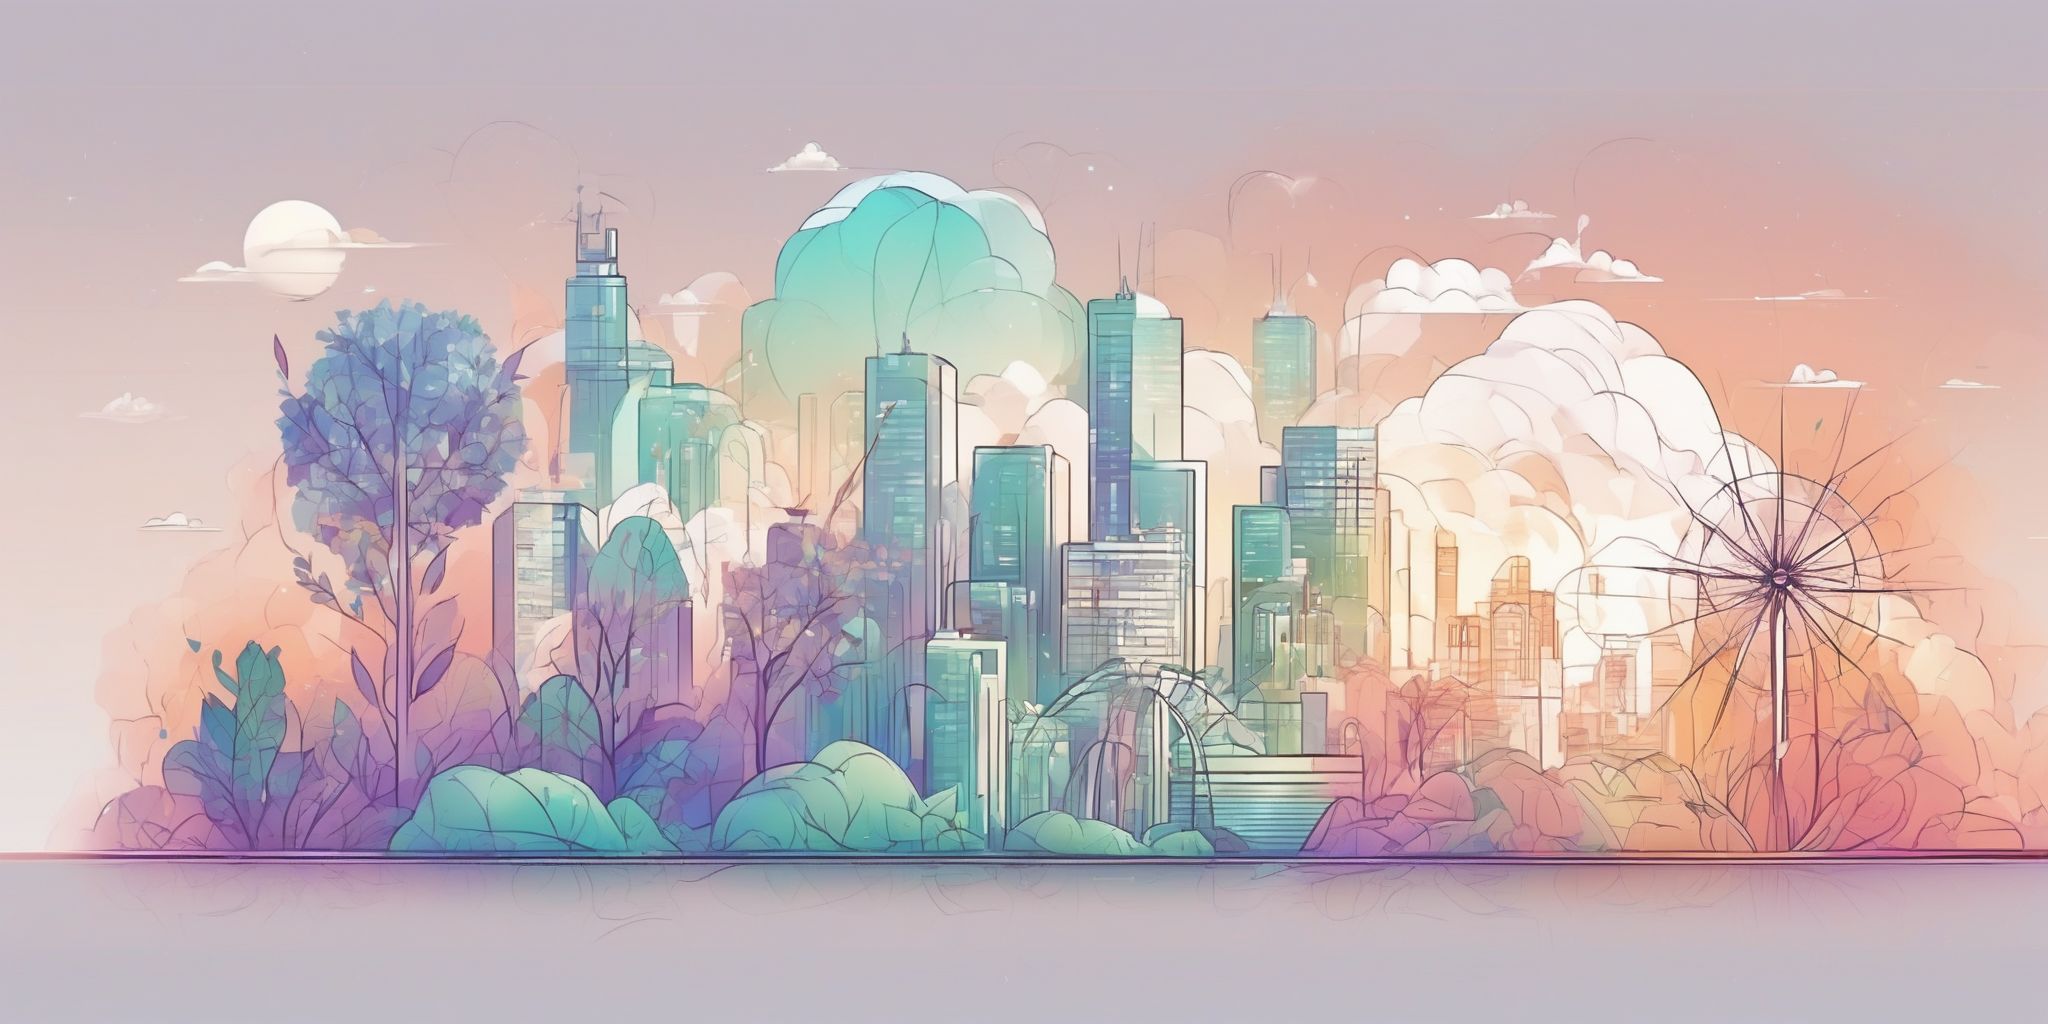 newcomer's guide in illustration style with gradients and white background